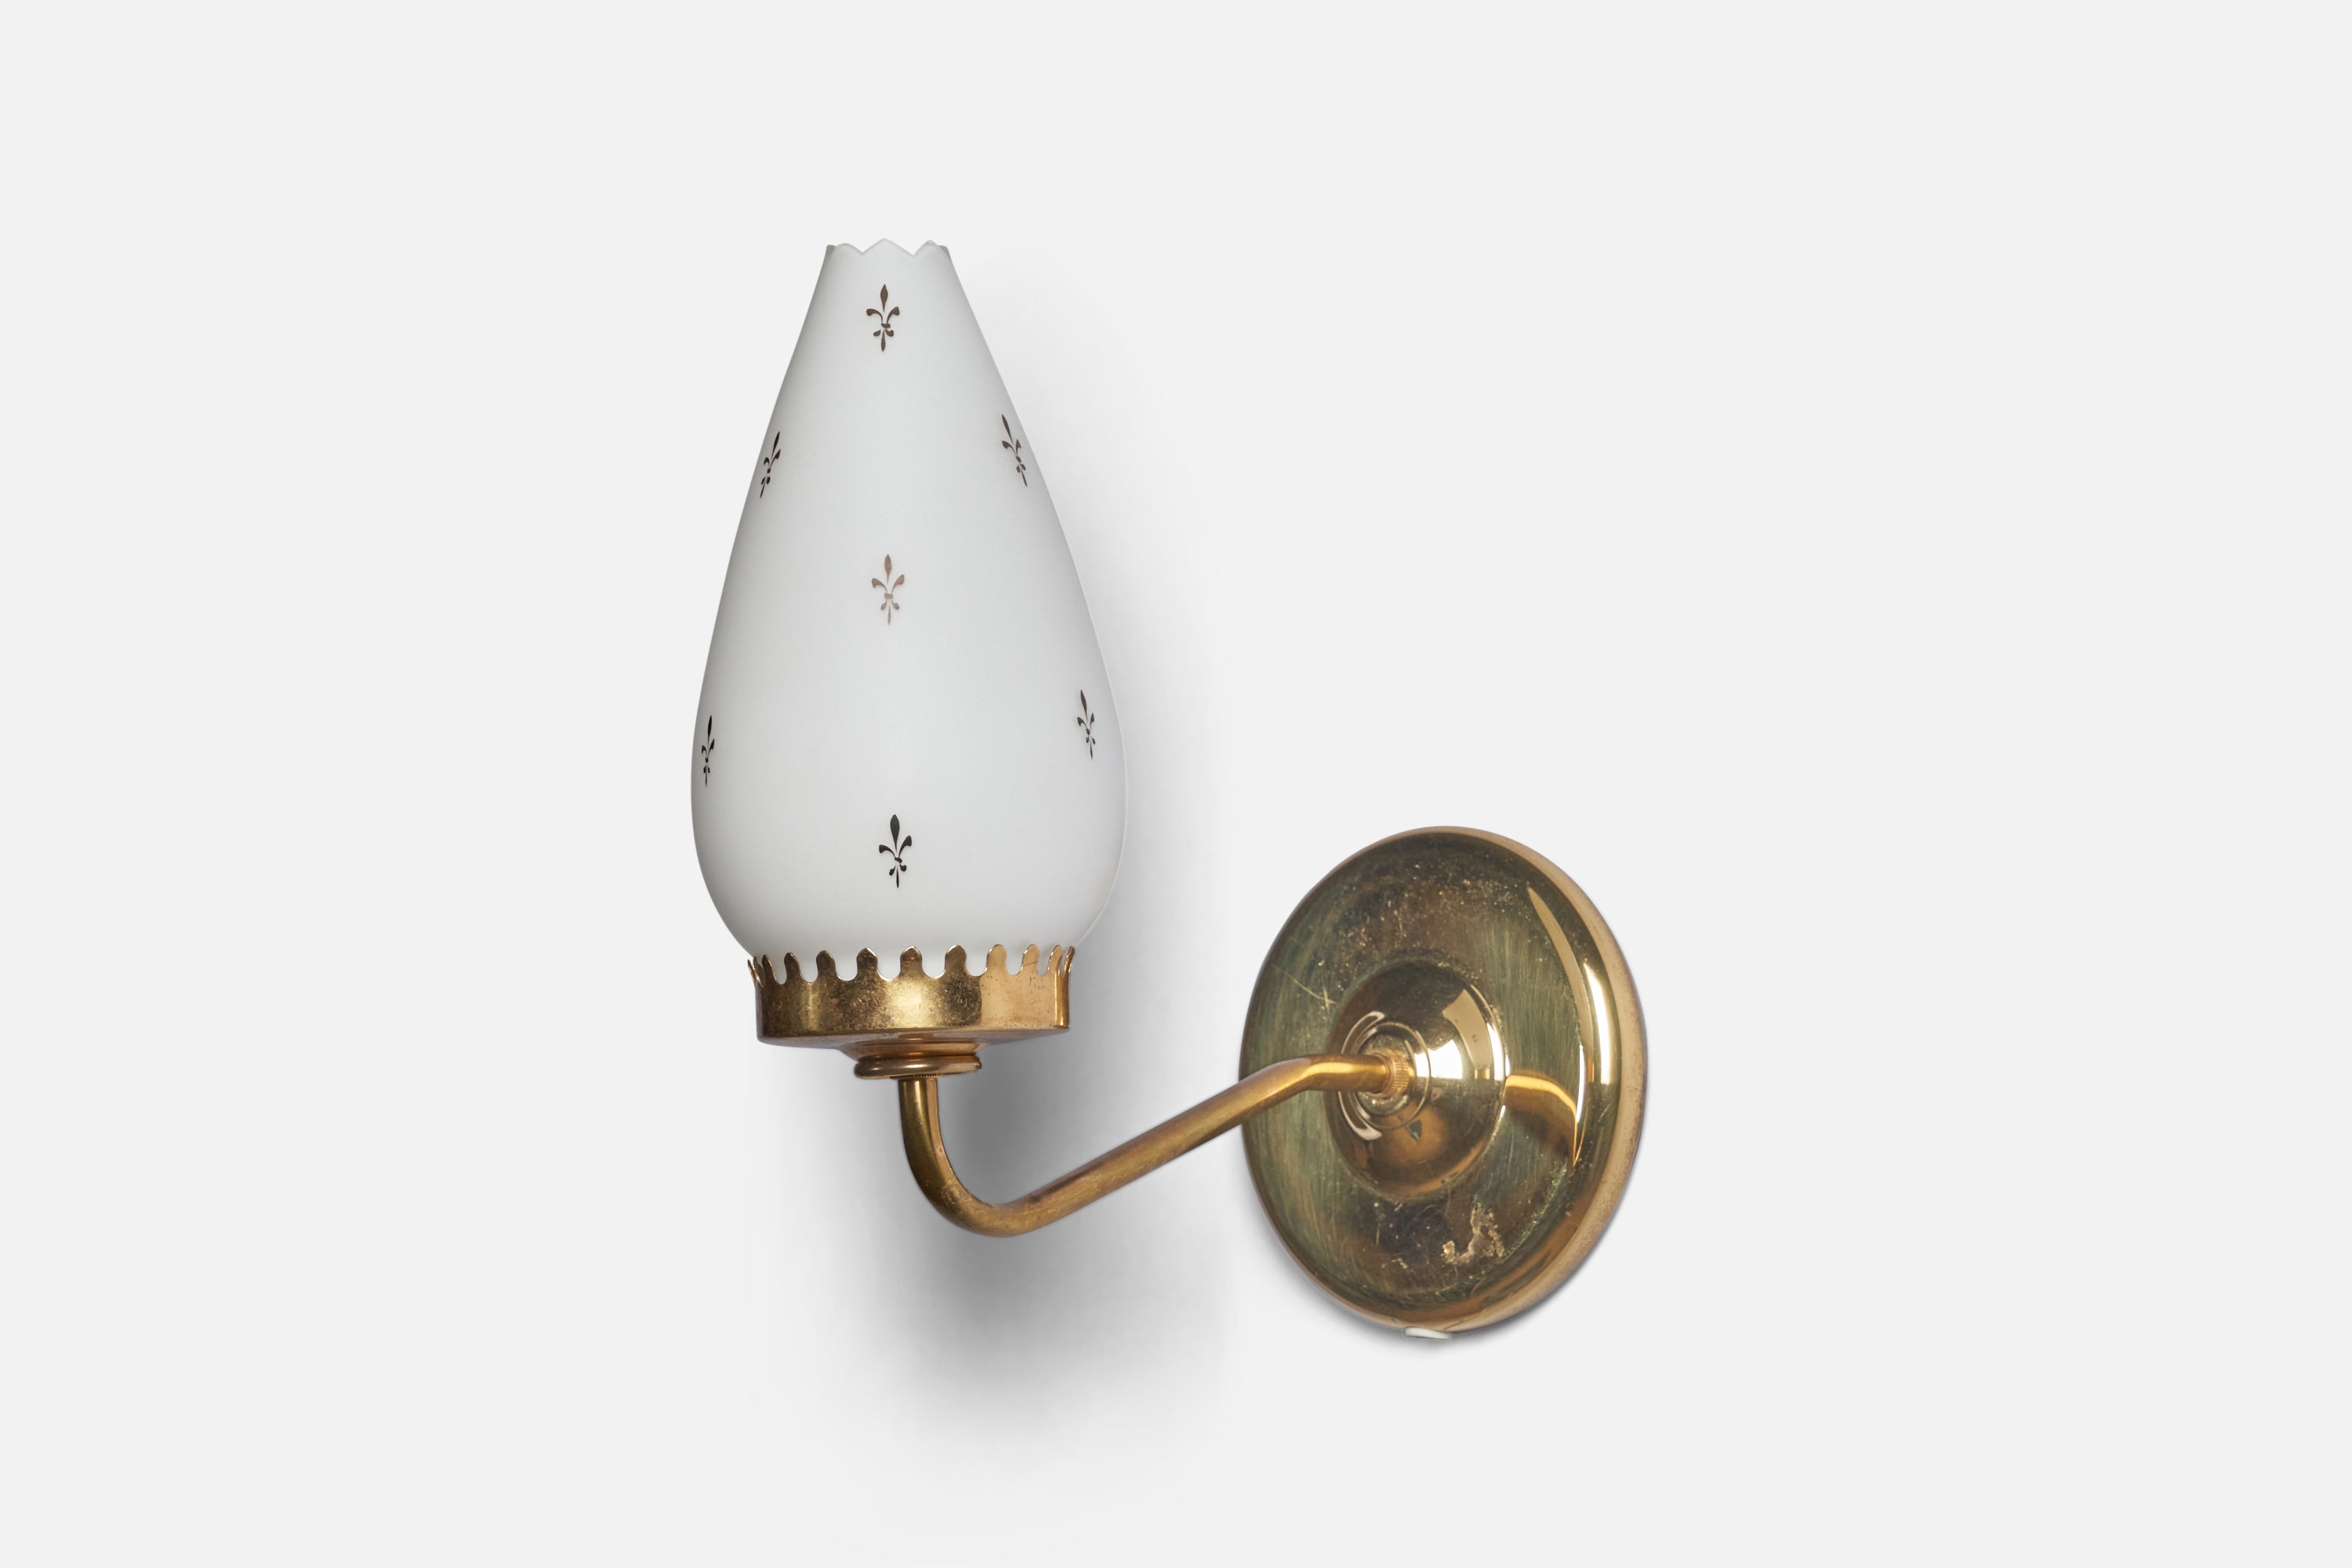 A pair of brass and decorated white glass wall lights, designed and produced in Sweden, c. 1970s.

Overall Dimensions: 11.5